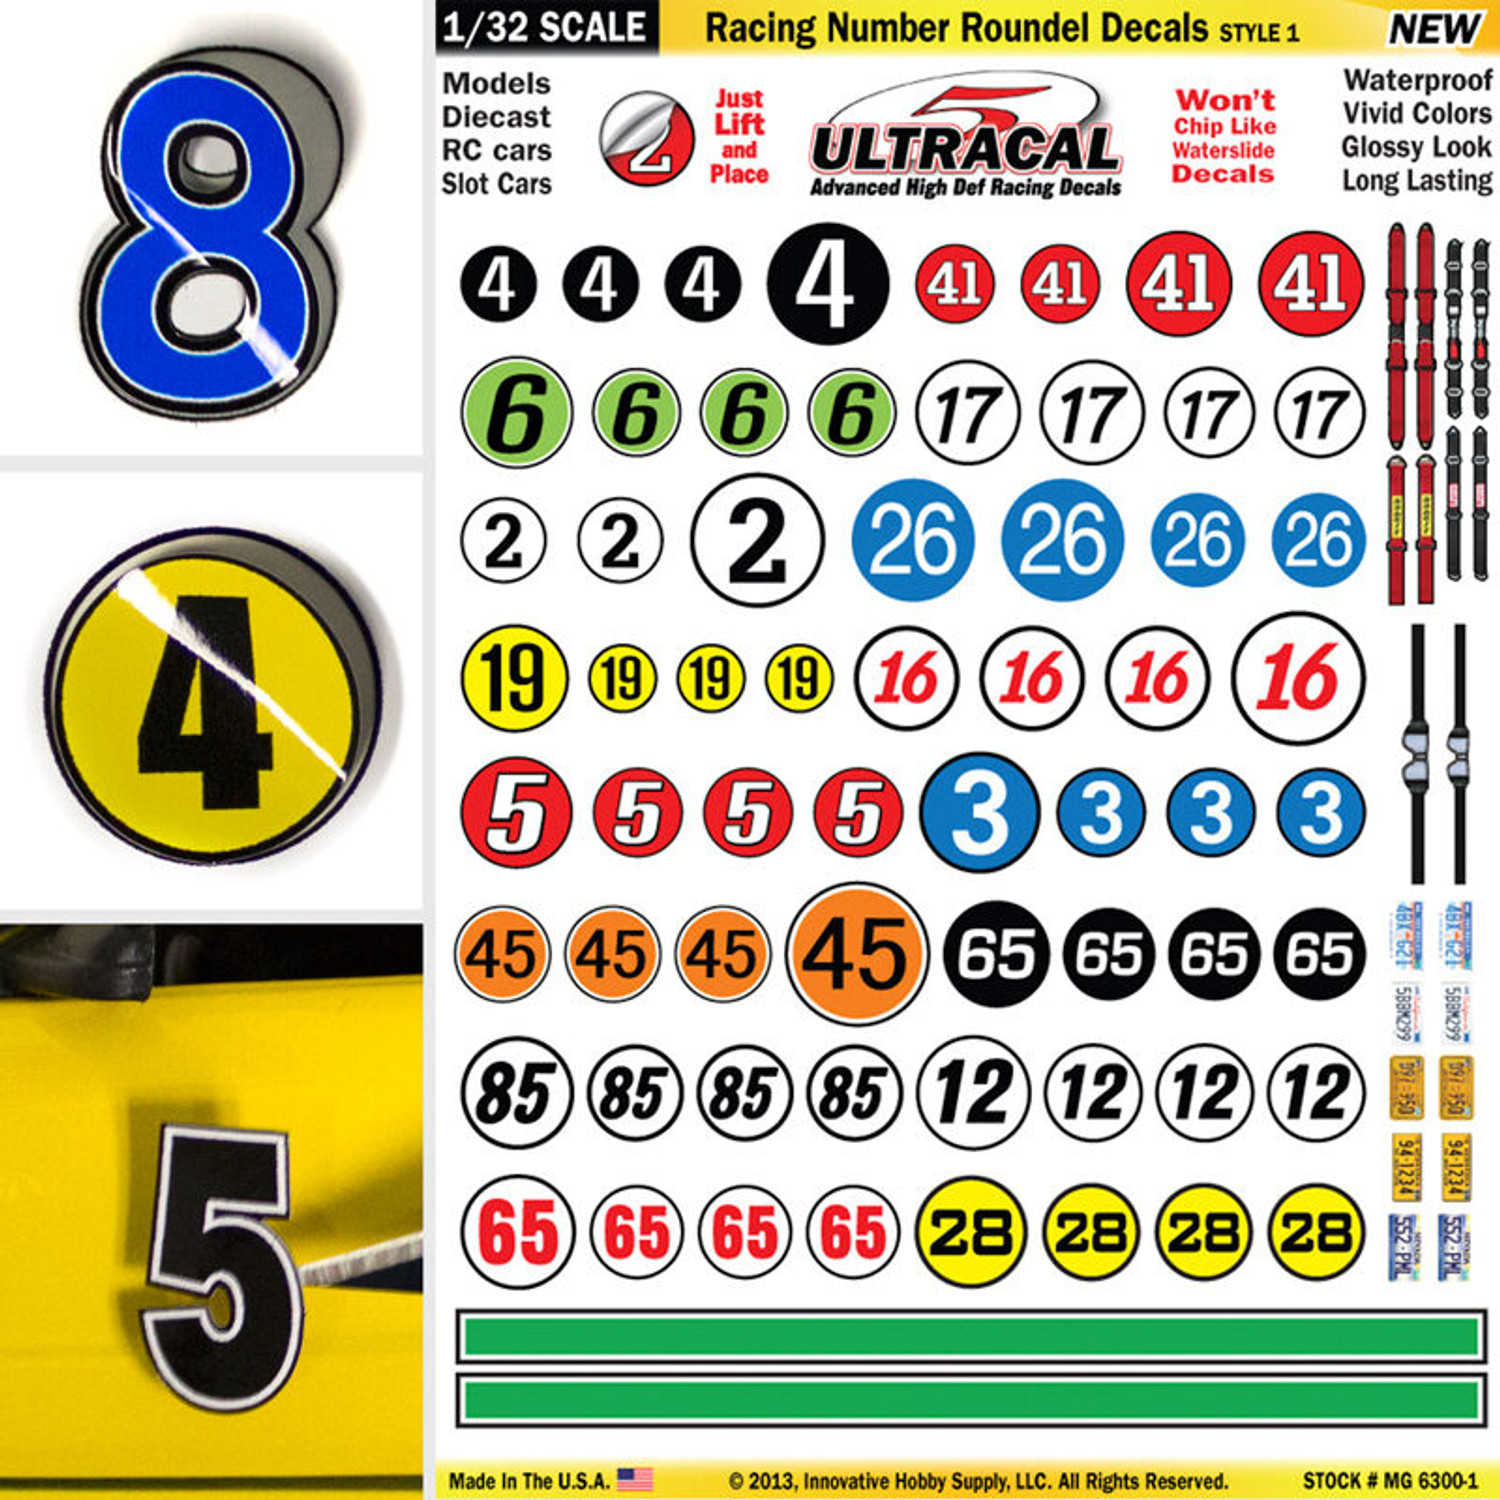 MG 6300-1 Ultracal Racing Roundel Decals Style 1